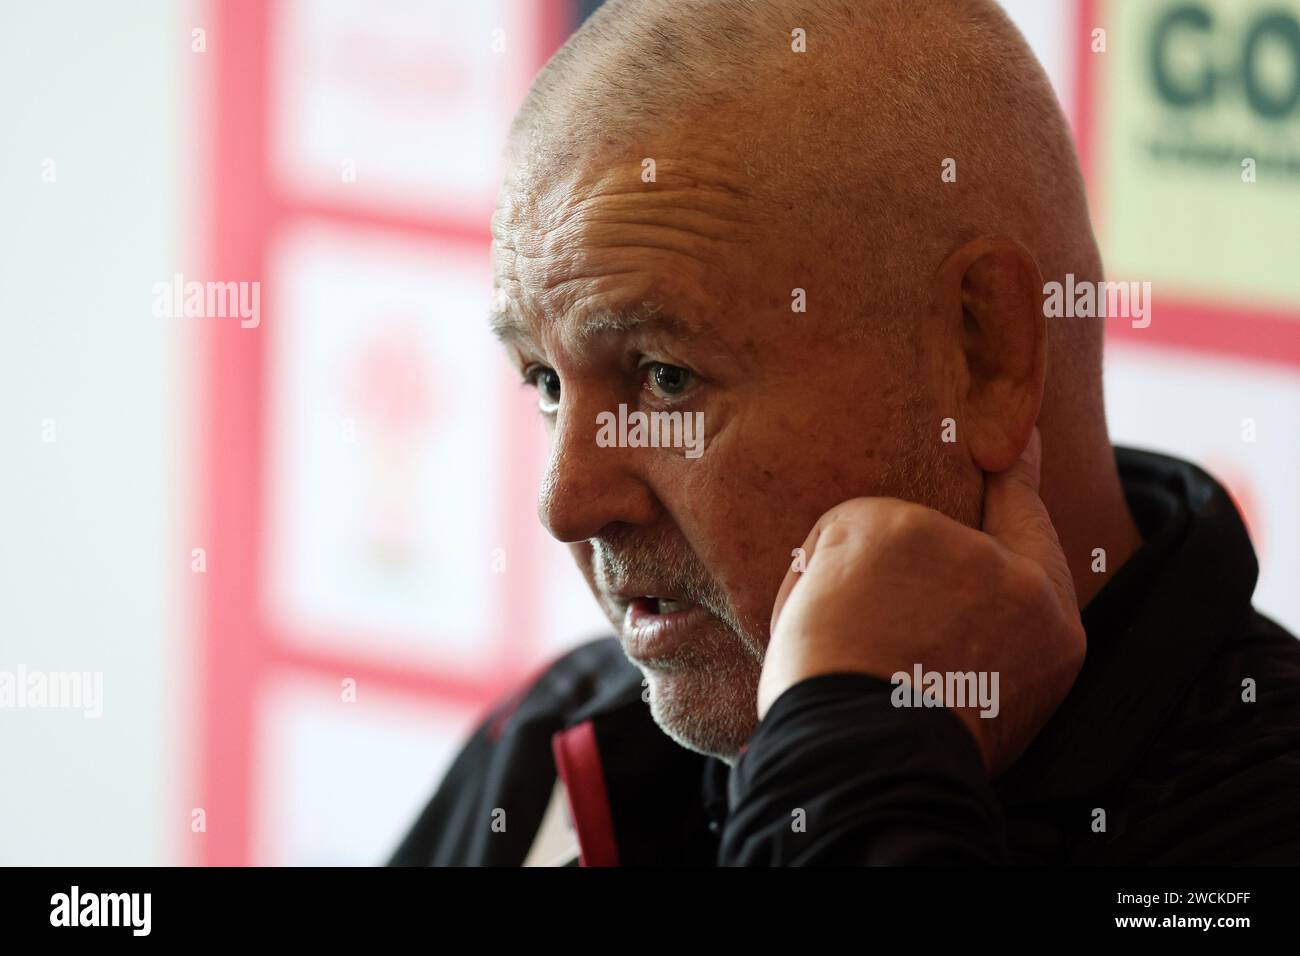 Cardiff, UK. 16th Jan, 2024. Warren Gatland, the head coach of Wales rugby team speaks to the media as he announces his Squad to play in this years Guinness six nations championship 2024 at the Vale Resort in Hensol, South Wales on Tuesday 16th January 2024. pic by Andrew Orchard/Andrew Orchard sports photography/ Alamy Live News Credit: Andrew Orchard sports photography/Alamy Live News Stock Photo